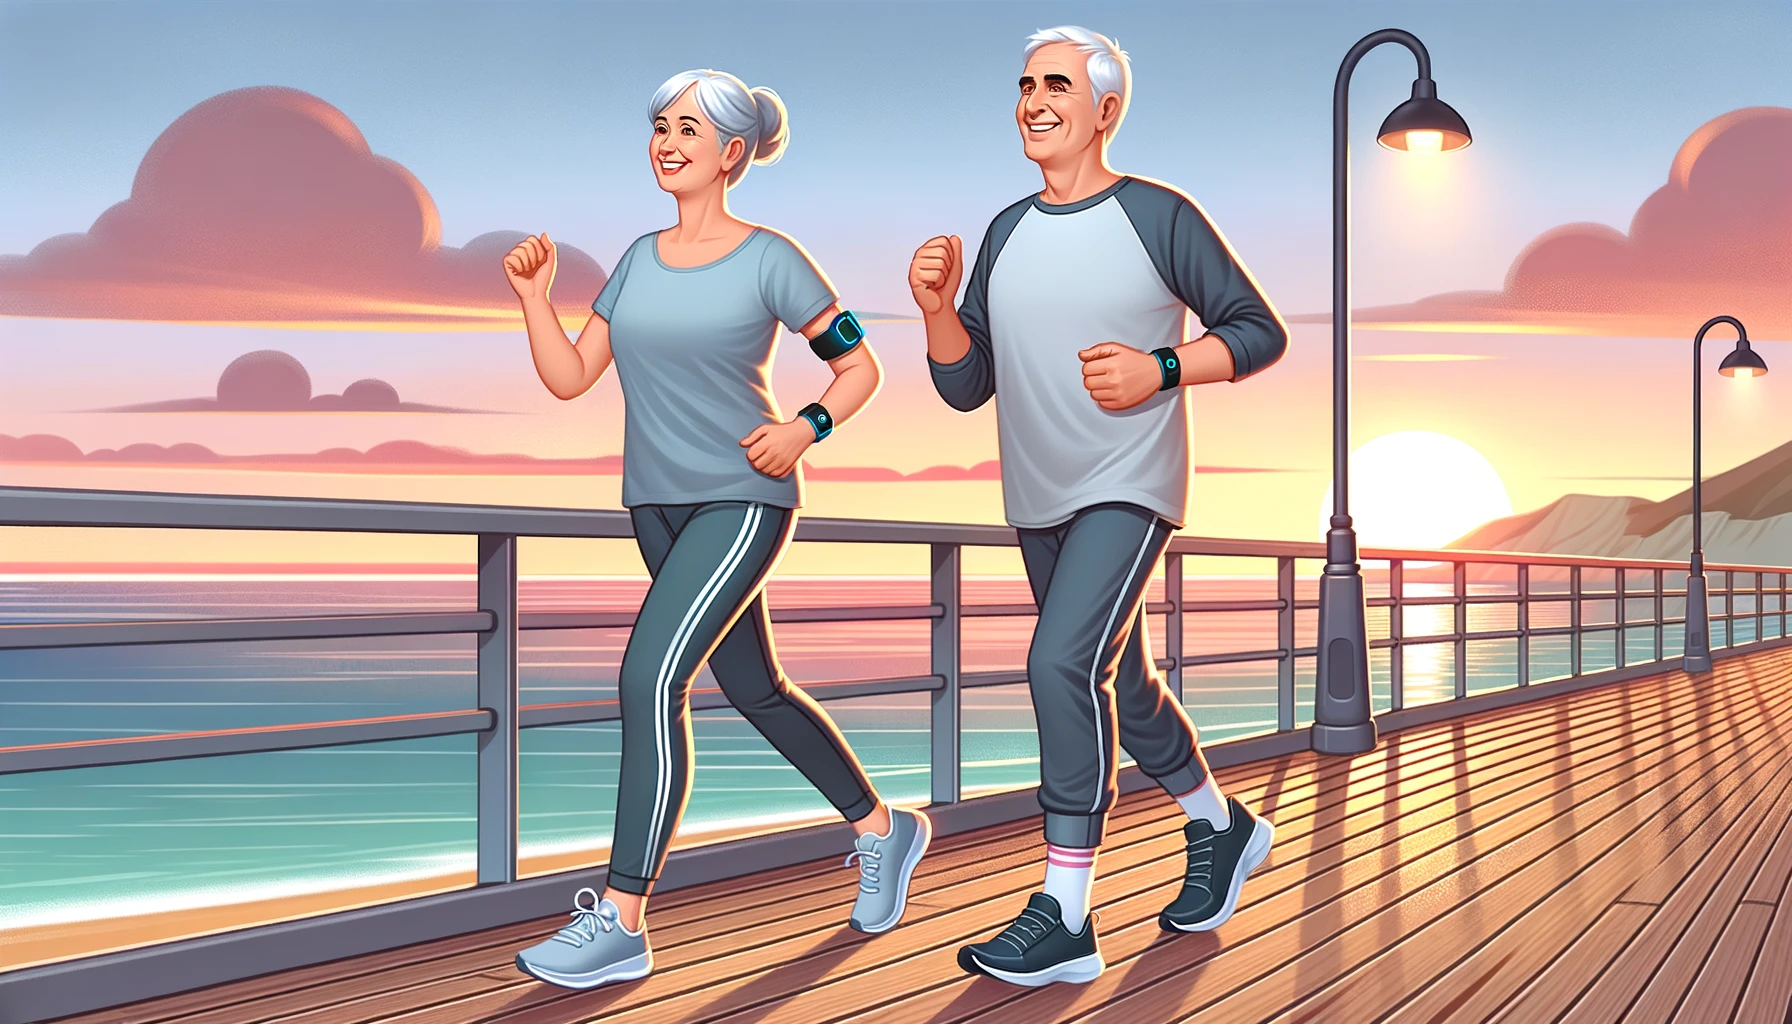 An illustration of an elderly couple joyfully walking on a beach boardwalk at sunset, indicating an active lifestyle.